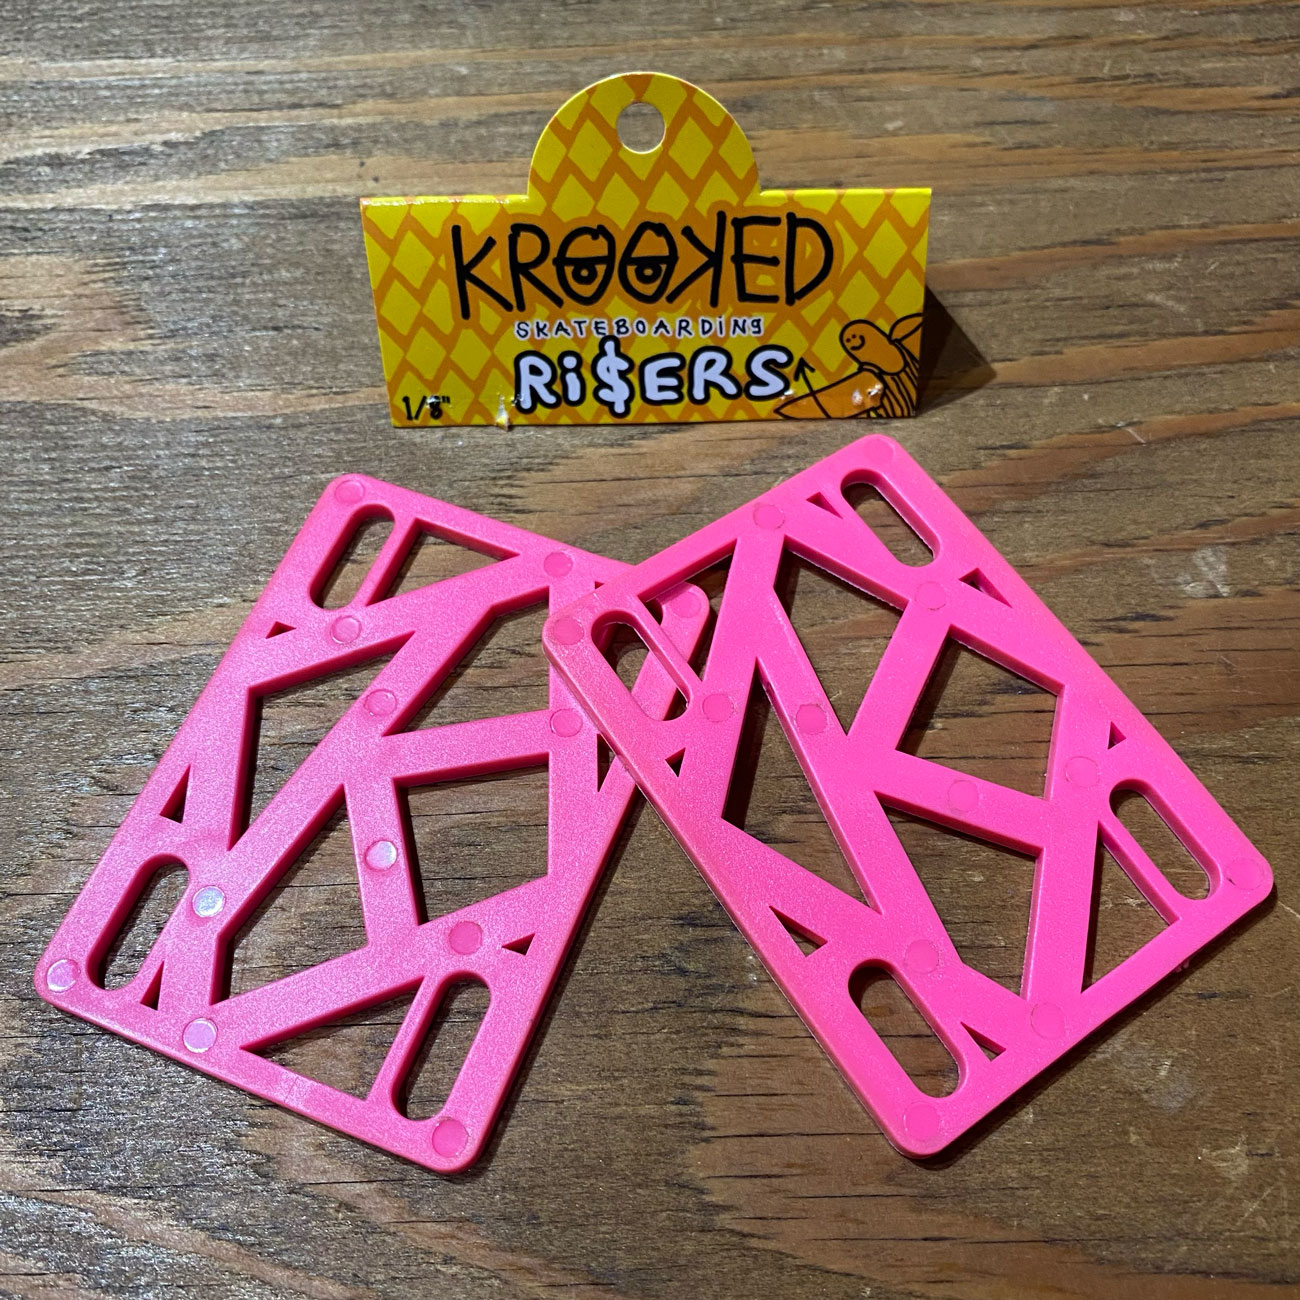 KROOKED RISERS 1/8inch